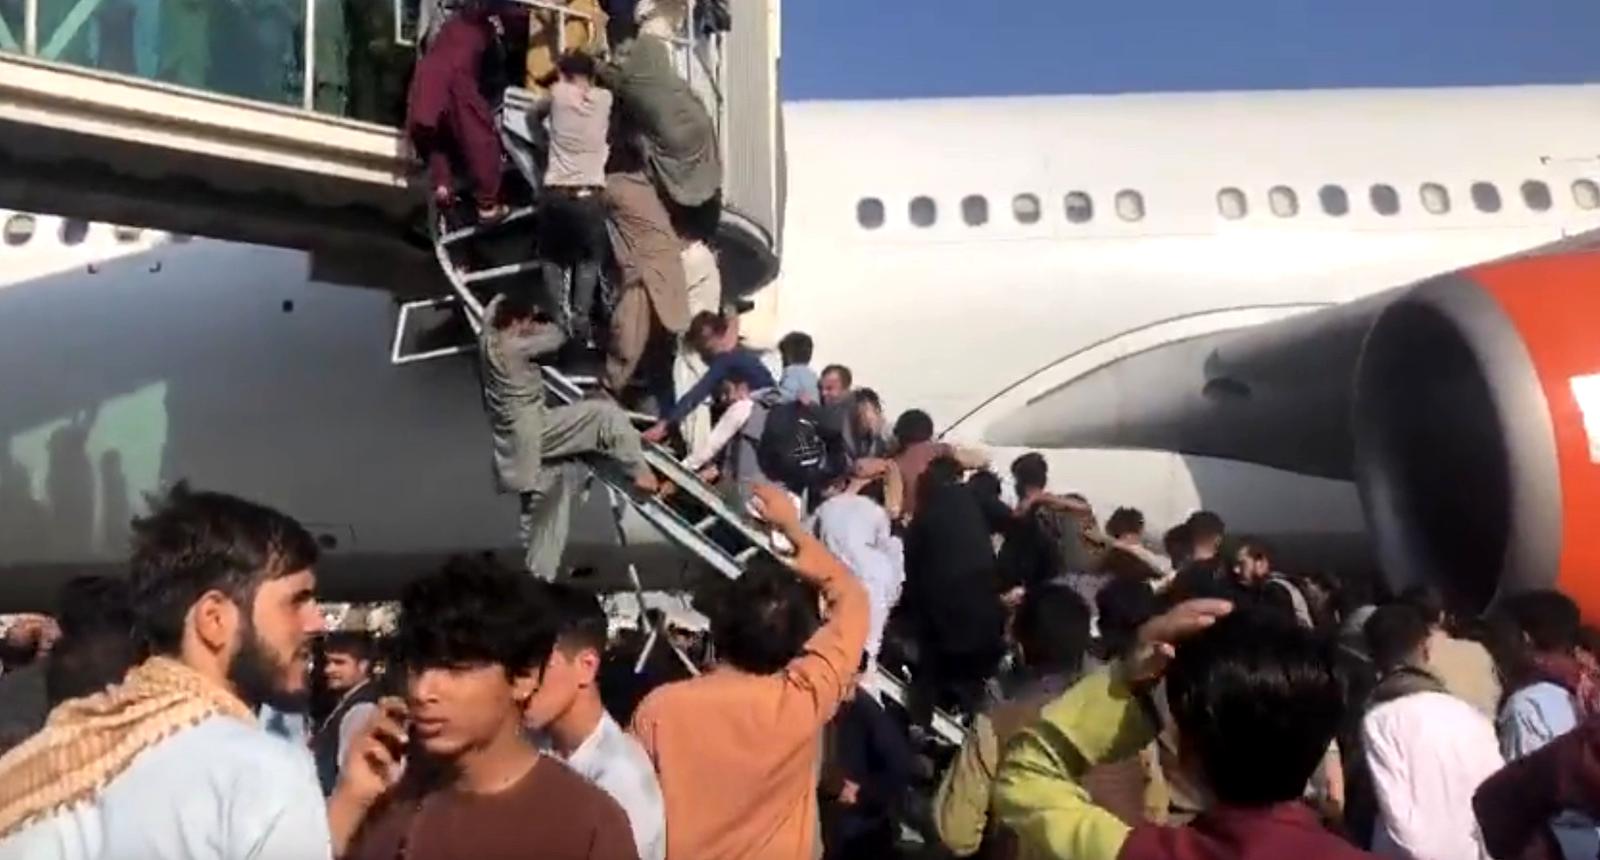 Heartbreaking Chaos At Kabul Airport | One Mile at a Time